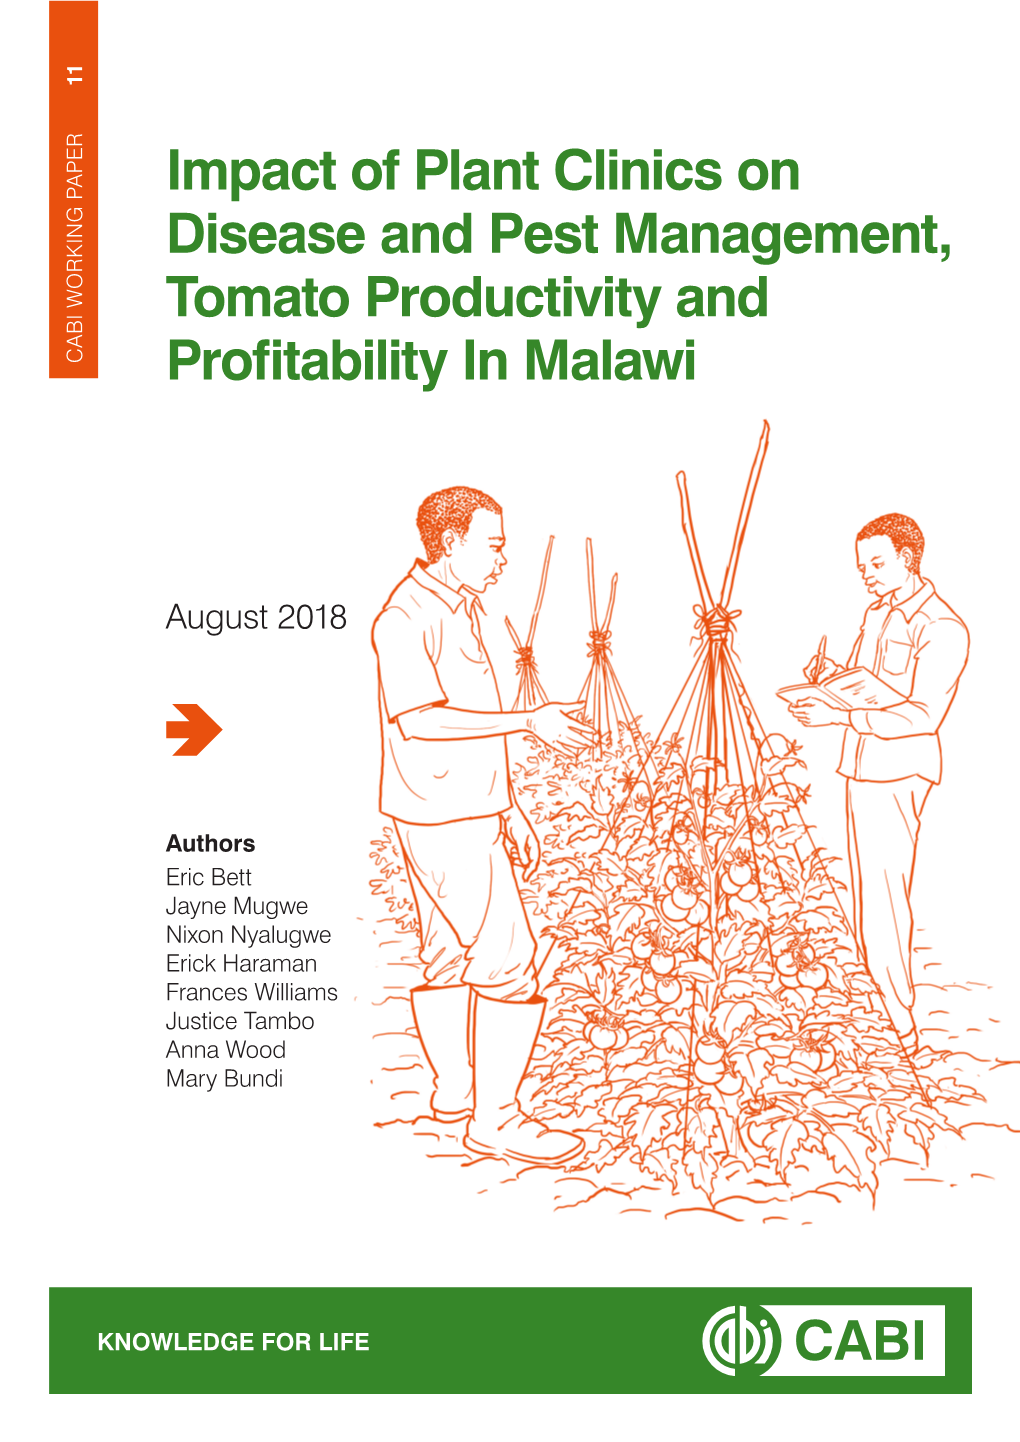 Impact of Plant Clinics on Disease and Pest Management, Tomato Productivity And